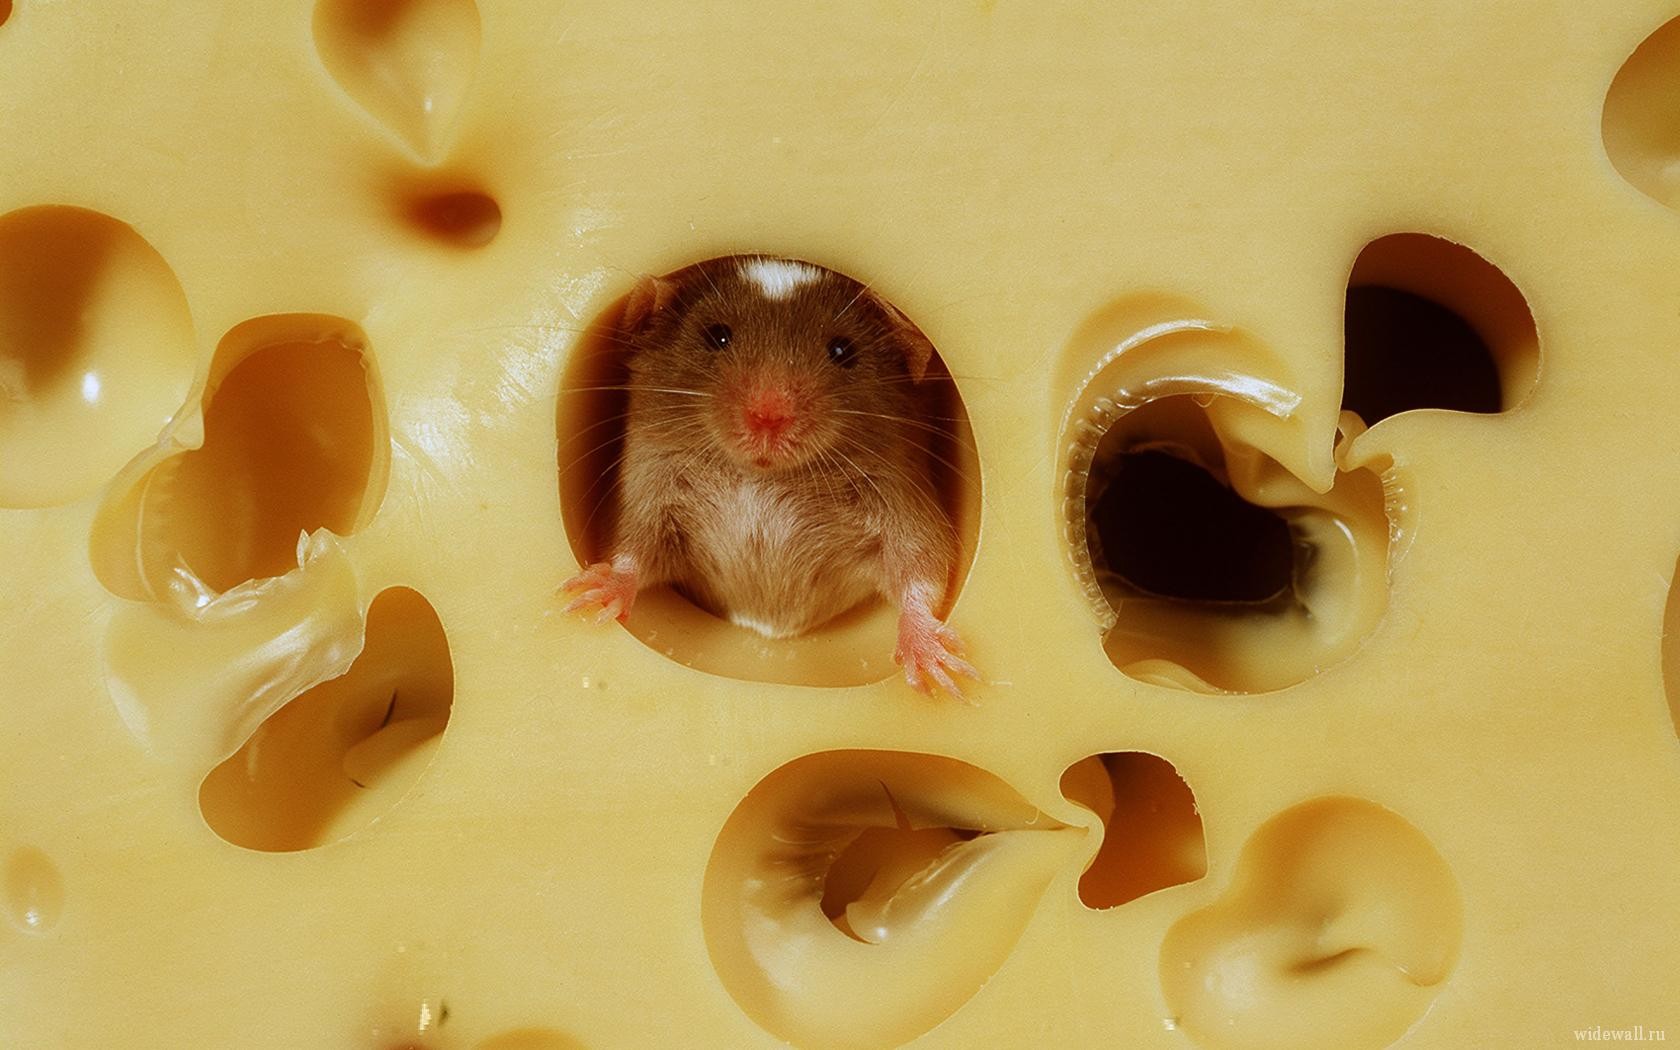 Mice do not like cheese. The myth started in the middle ages when mice were often found eating cheese, but that's because cheese was the only thing around for the hungry mice. Learn more on <a href="http://www.dailymail.co.uk/news/article-403925/Mice-hate-cheese-new-study-reveals.html" target="_blank">Daily Mail</a>.